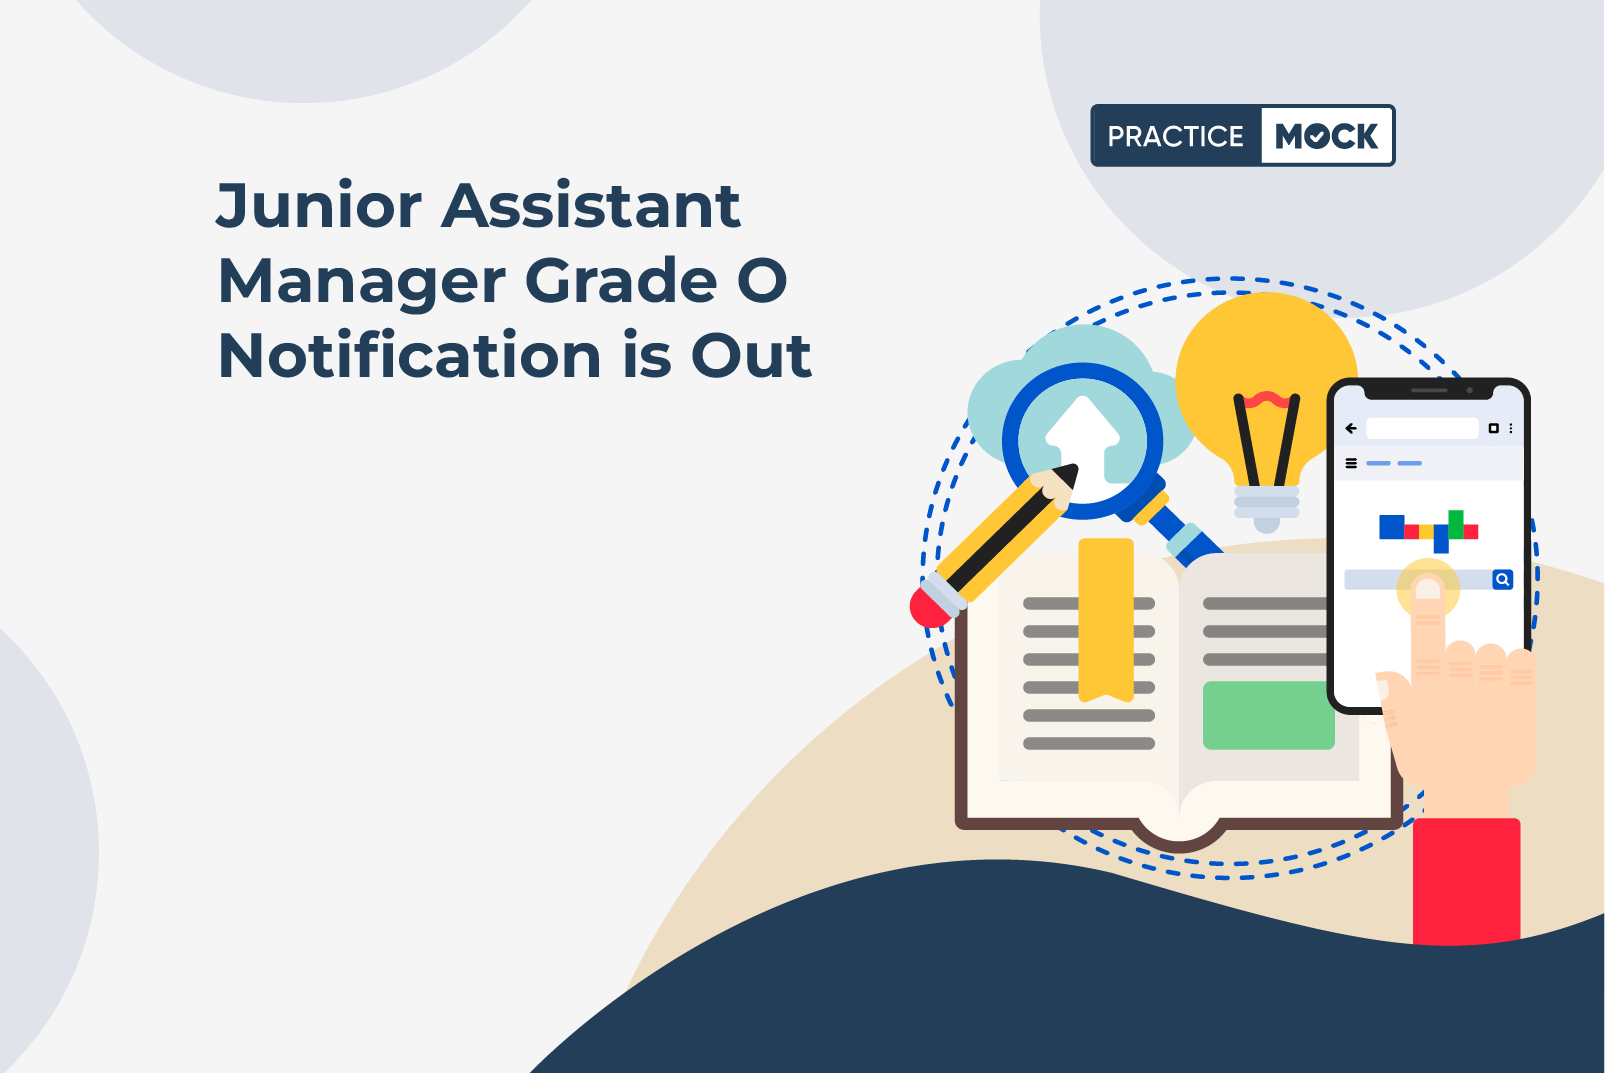 Junior Assistant Manager Grade O Notification is Out